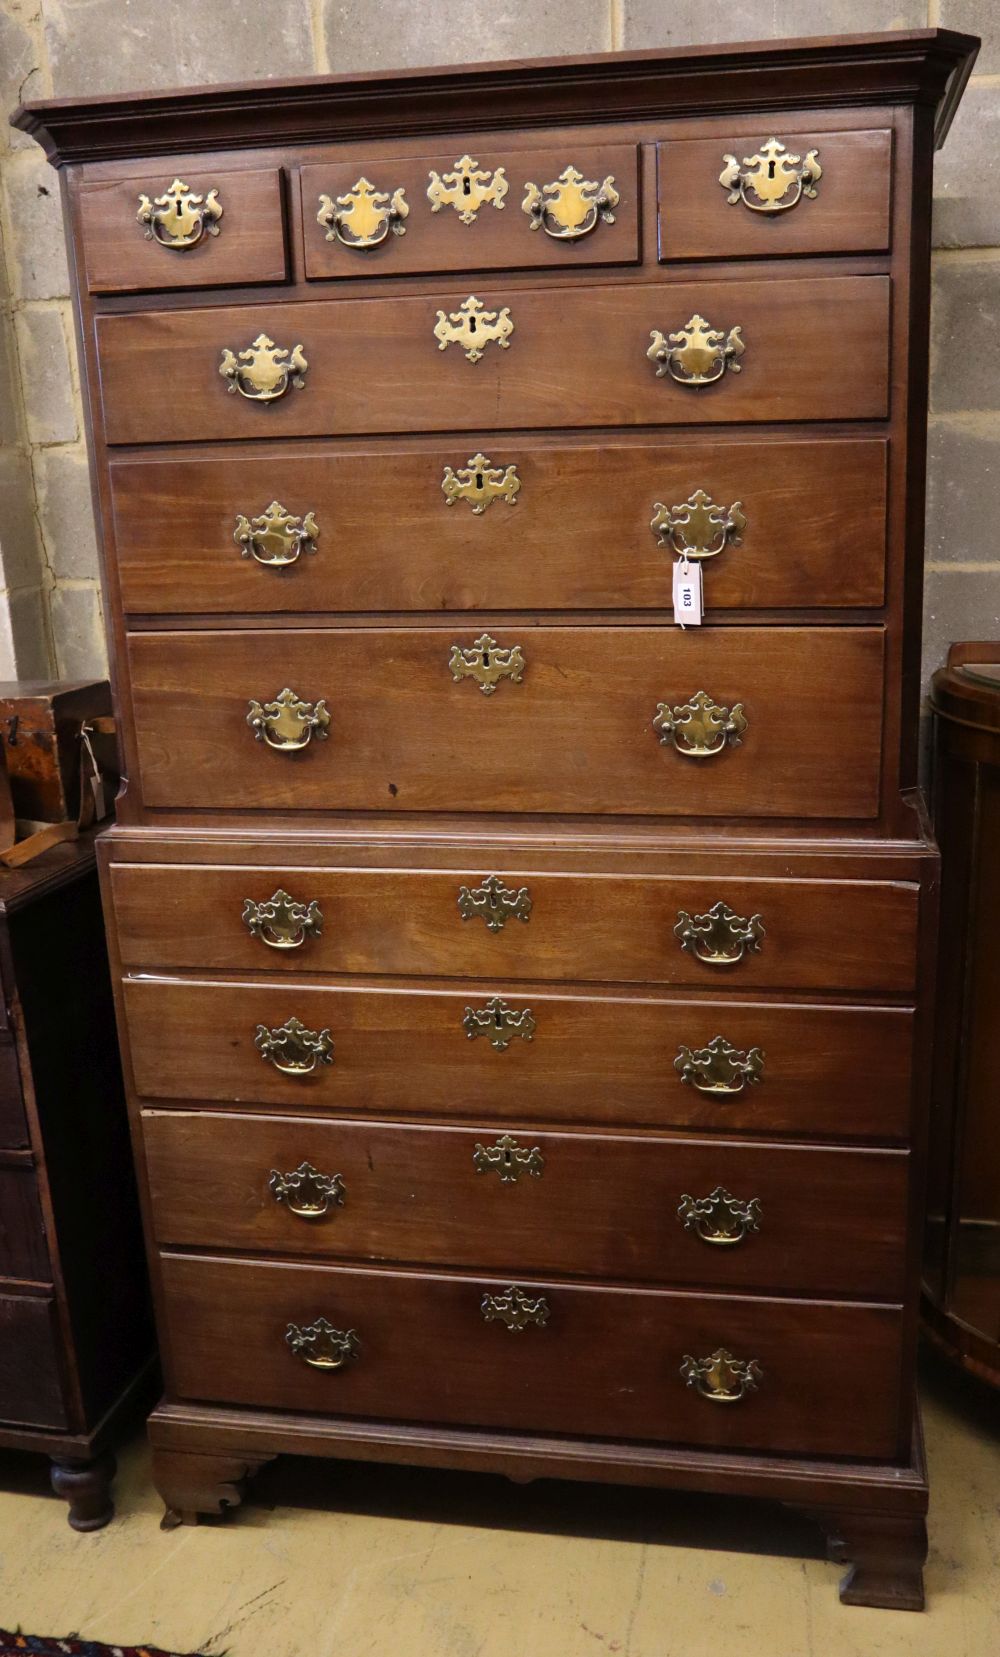 A mid-18th century mahogany chest on chest, width 110cm depth 55cm height 197cm (a.f.)